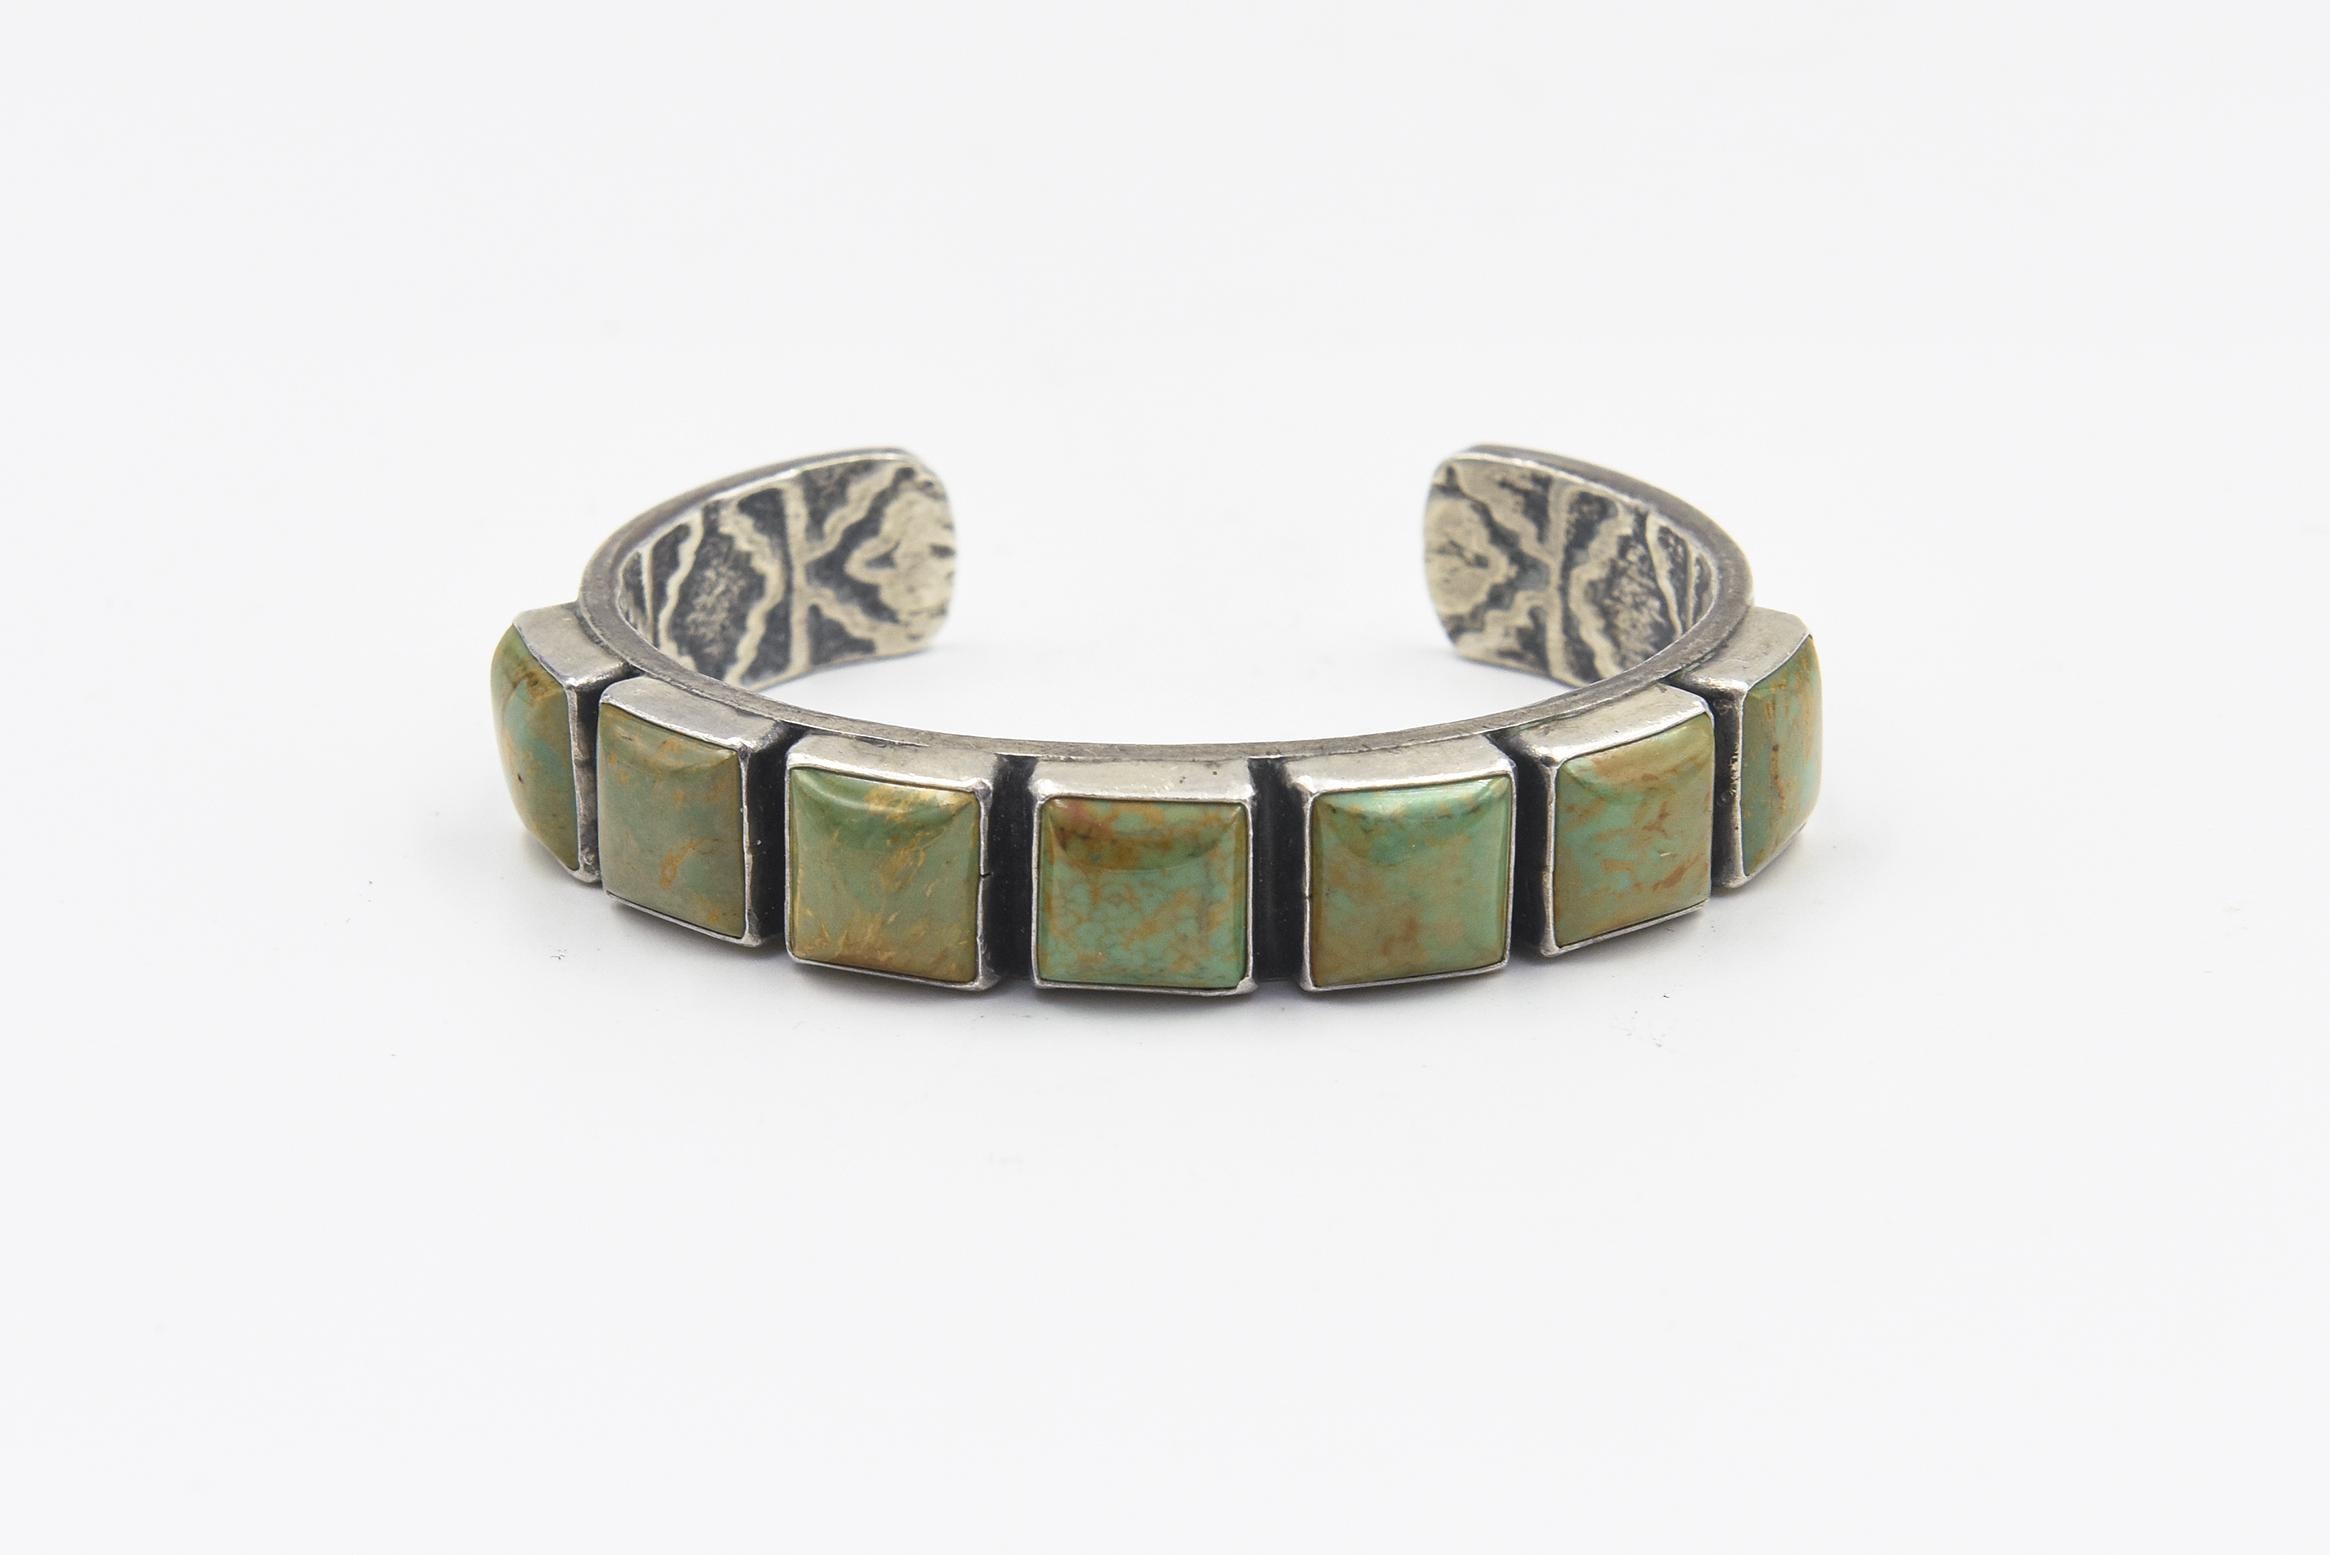 Vintage Native American Navajo Sterling Silver Green Turquoise Cuff Bracelet by Kirk Smith (1956-2012)

This beautiful Southwest sterling silver cuff bracelet is set with seven square turquoise cabochons in smooth bezel settings. The bracelet design